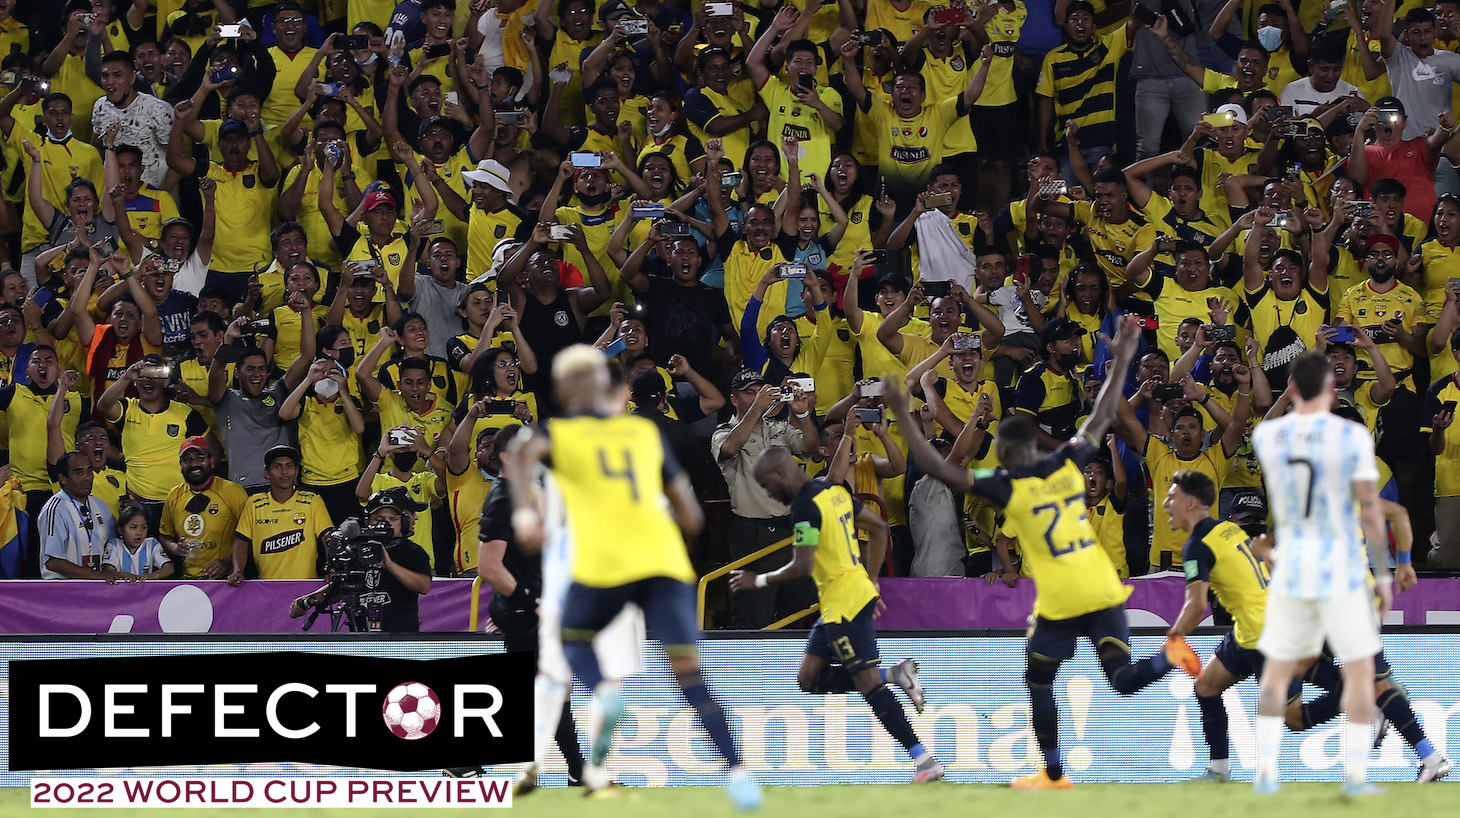 Fans celebrate the tying goal scored by Enner Valencia of Ecuador during the FIFA World Cup Qatar 2022 qualification match between Ecuador and Argentina at Estadio Monumental on March 29, 2022 in Guayaquil, Ecuador.